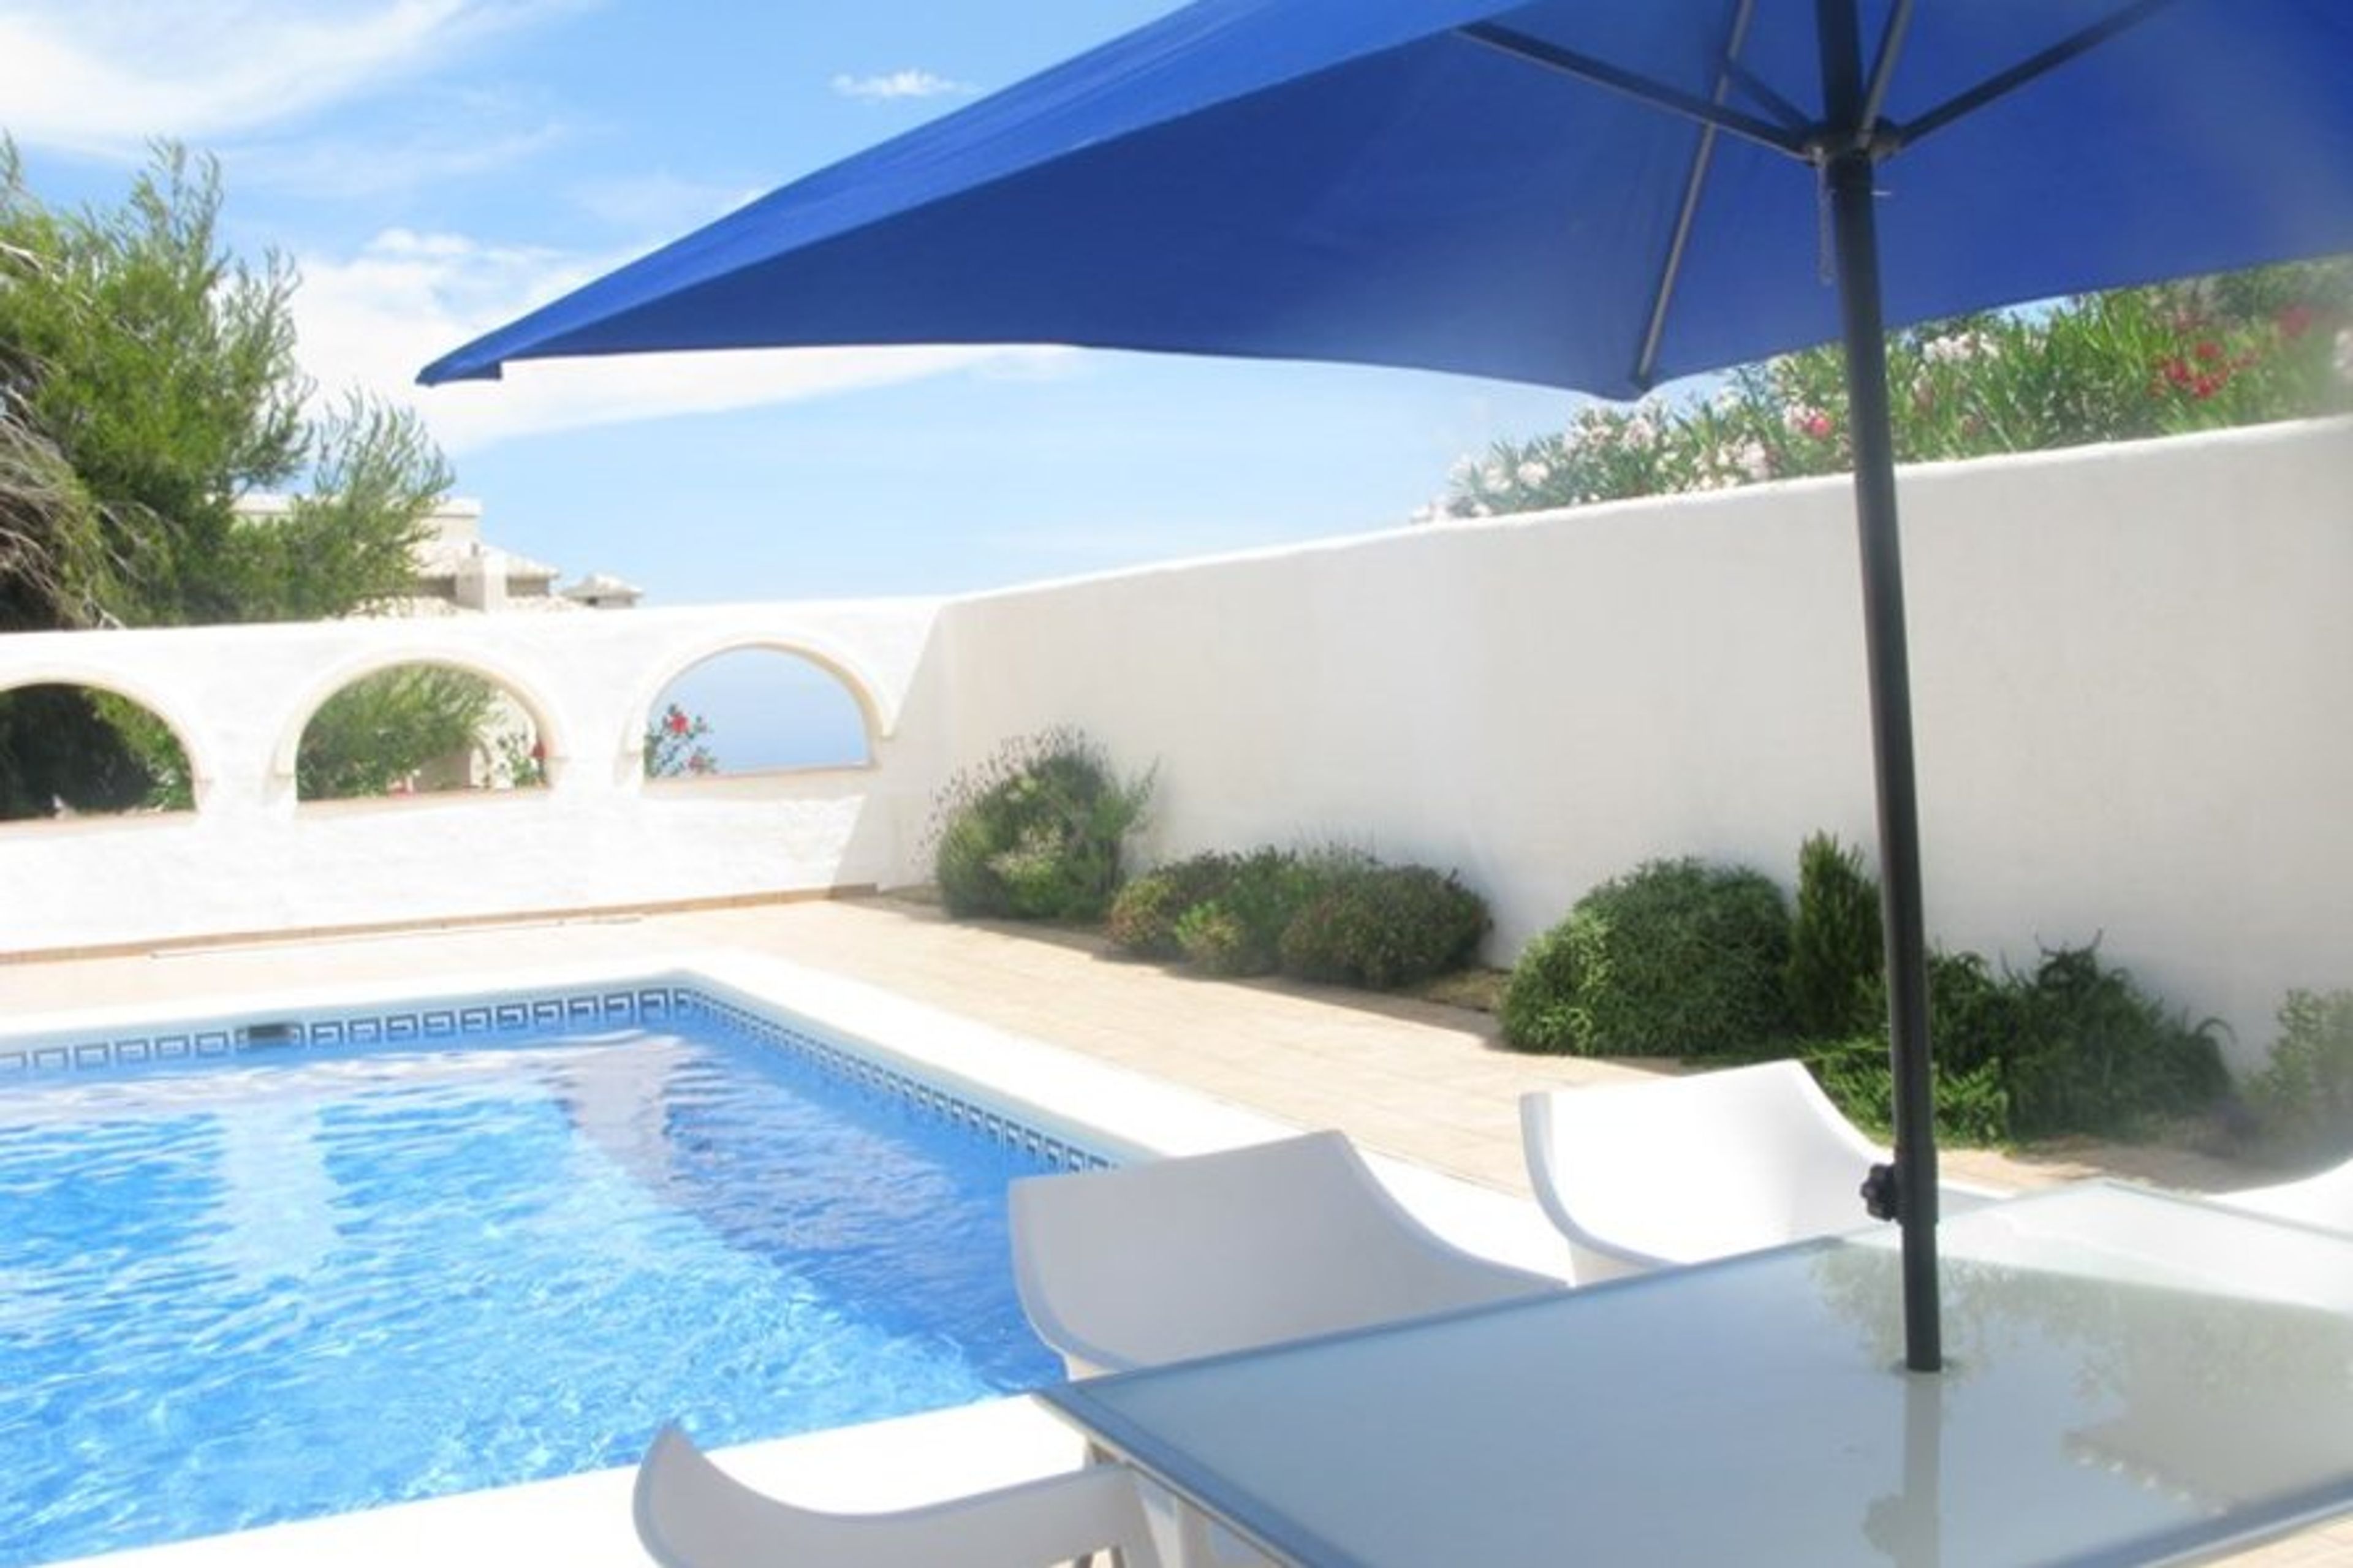 2 bedroom villa overlooking the sea, private pool in arched courtyard